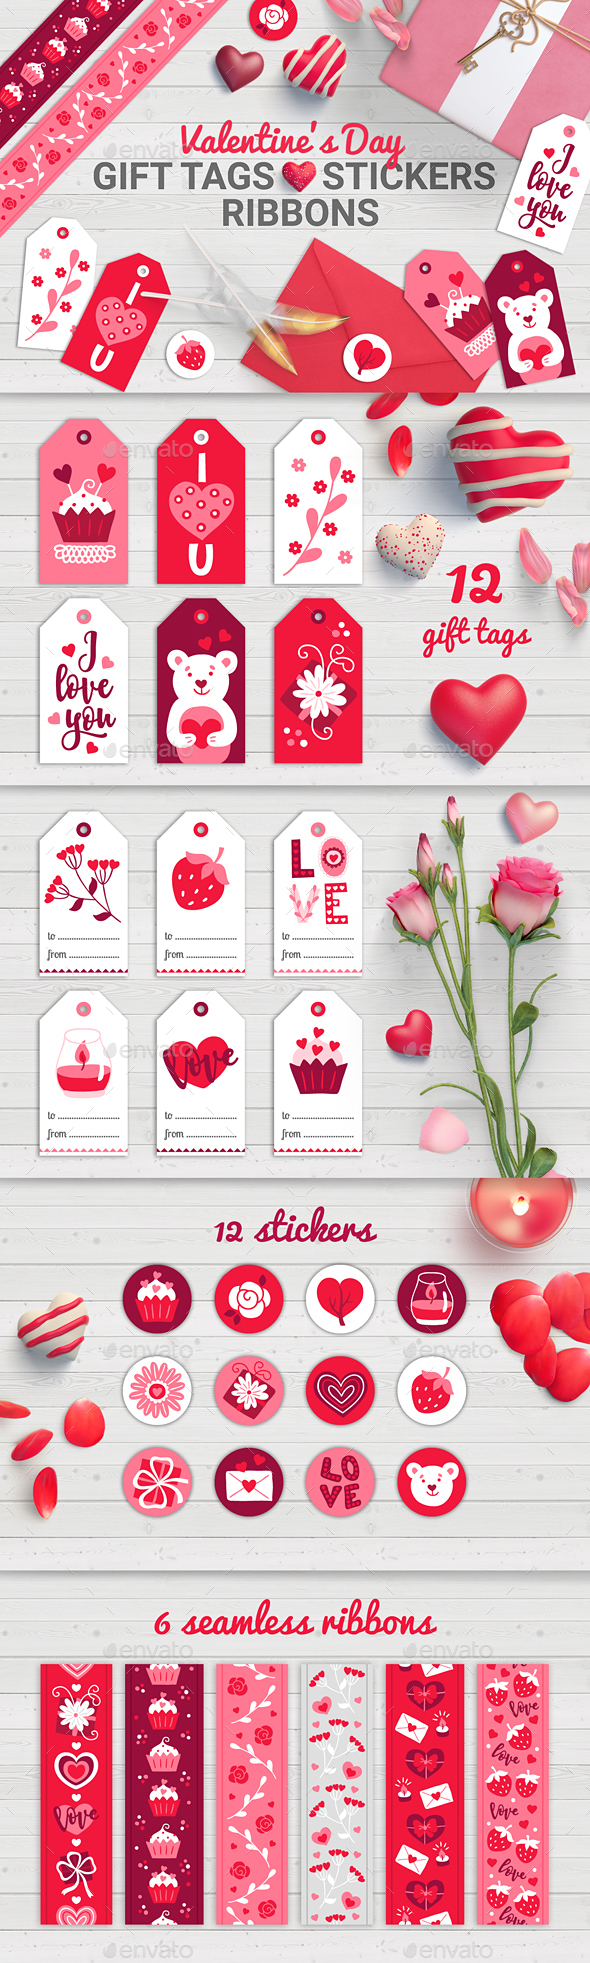 Valentine Gift Tags, Stickers, Ribbons